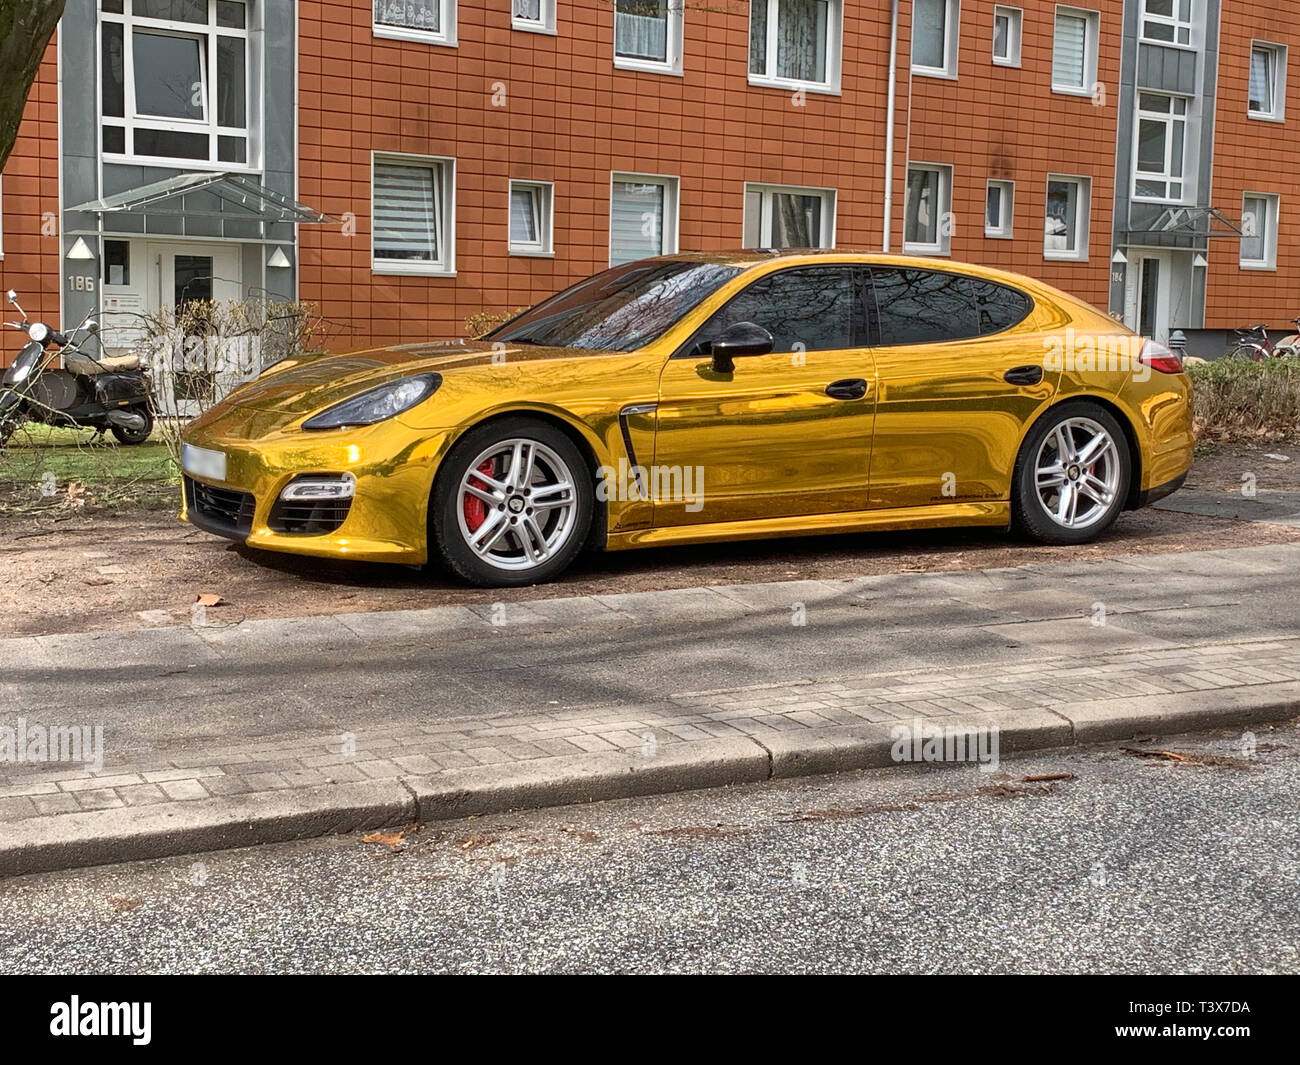 Hamburg, Germany. 03rd Apr, 2019. A Porsche Panamera covered with gold foil stands on a side strip. The police pulled the vehicle out of circulation because the foil strongly reflected incident light and the dazzling effect endangered other road users. Credit: Marius Roeer/dpa - ATTENTION: Indicator pixelated for legal reasons/dpa/Alamy Live News Stock Photo